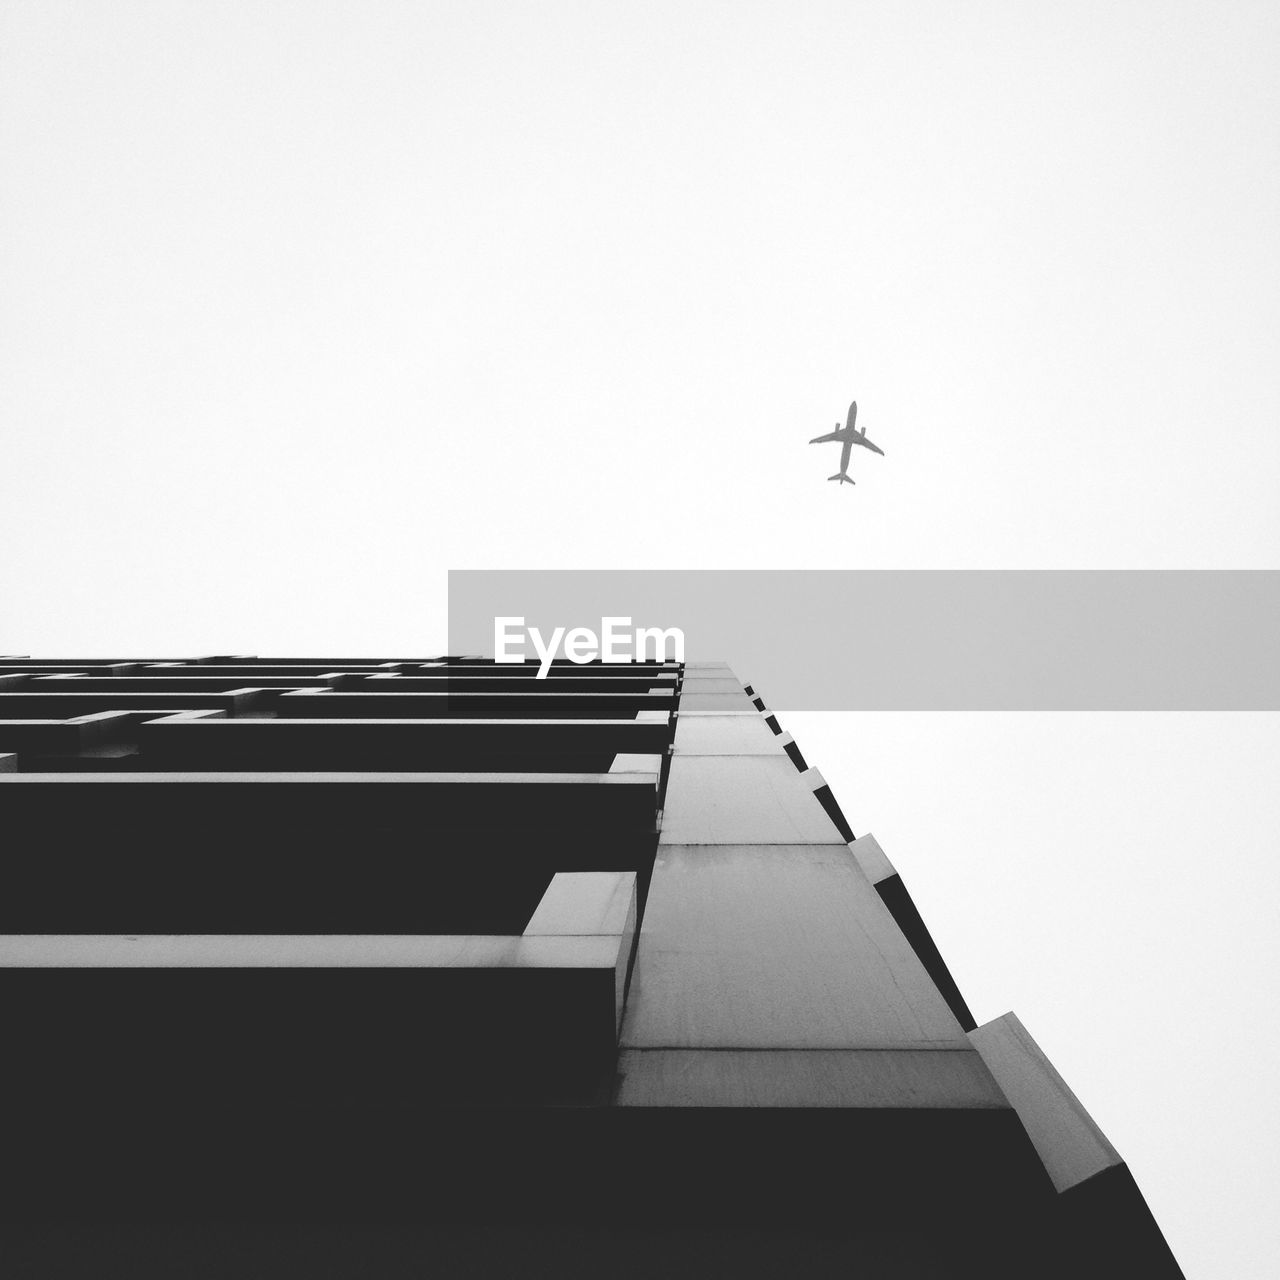 Low angle view of airplane and building against clear sky